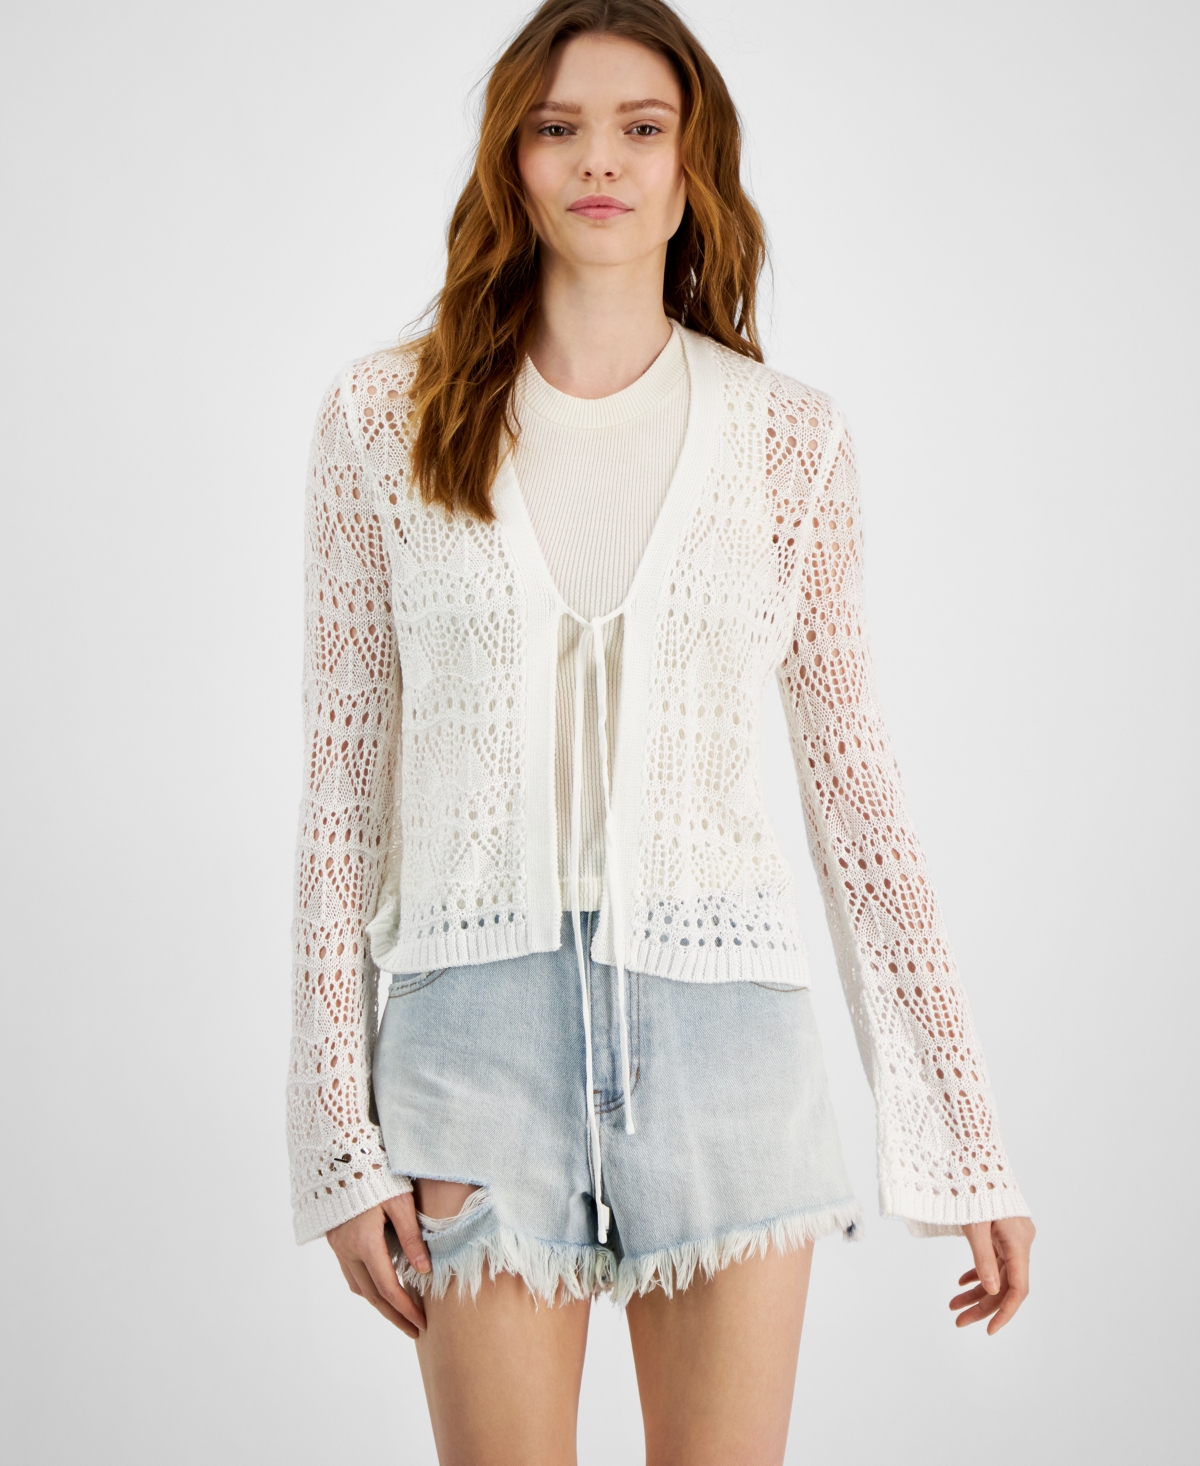 Hooked Up by Iot Juniors' Open-Knit Tie-Front Cardigan Sweater